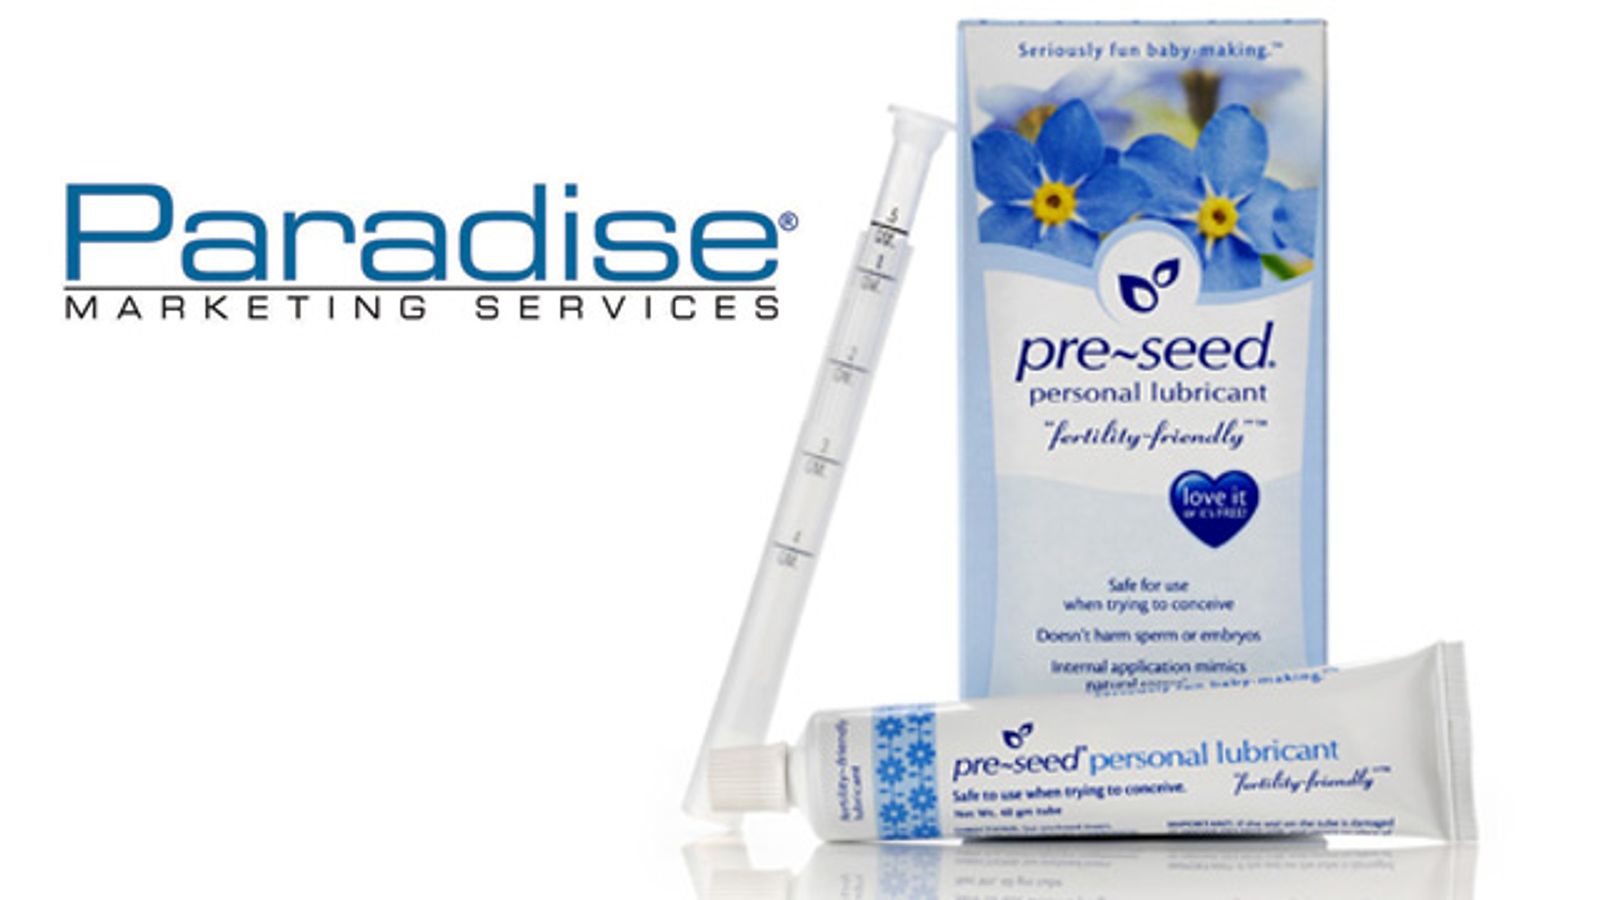 Paradise Marketing Brings First Proven ‘Fertility Friendly’ Lube to Adult Market